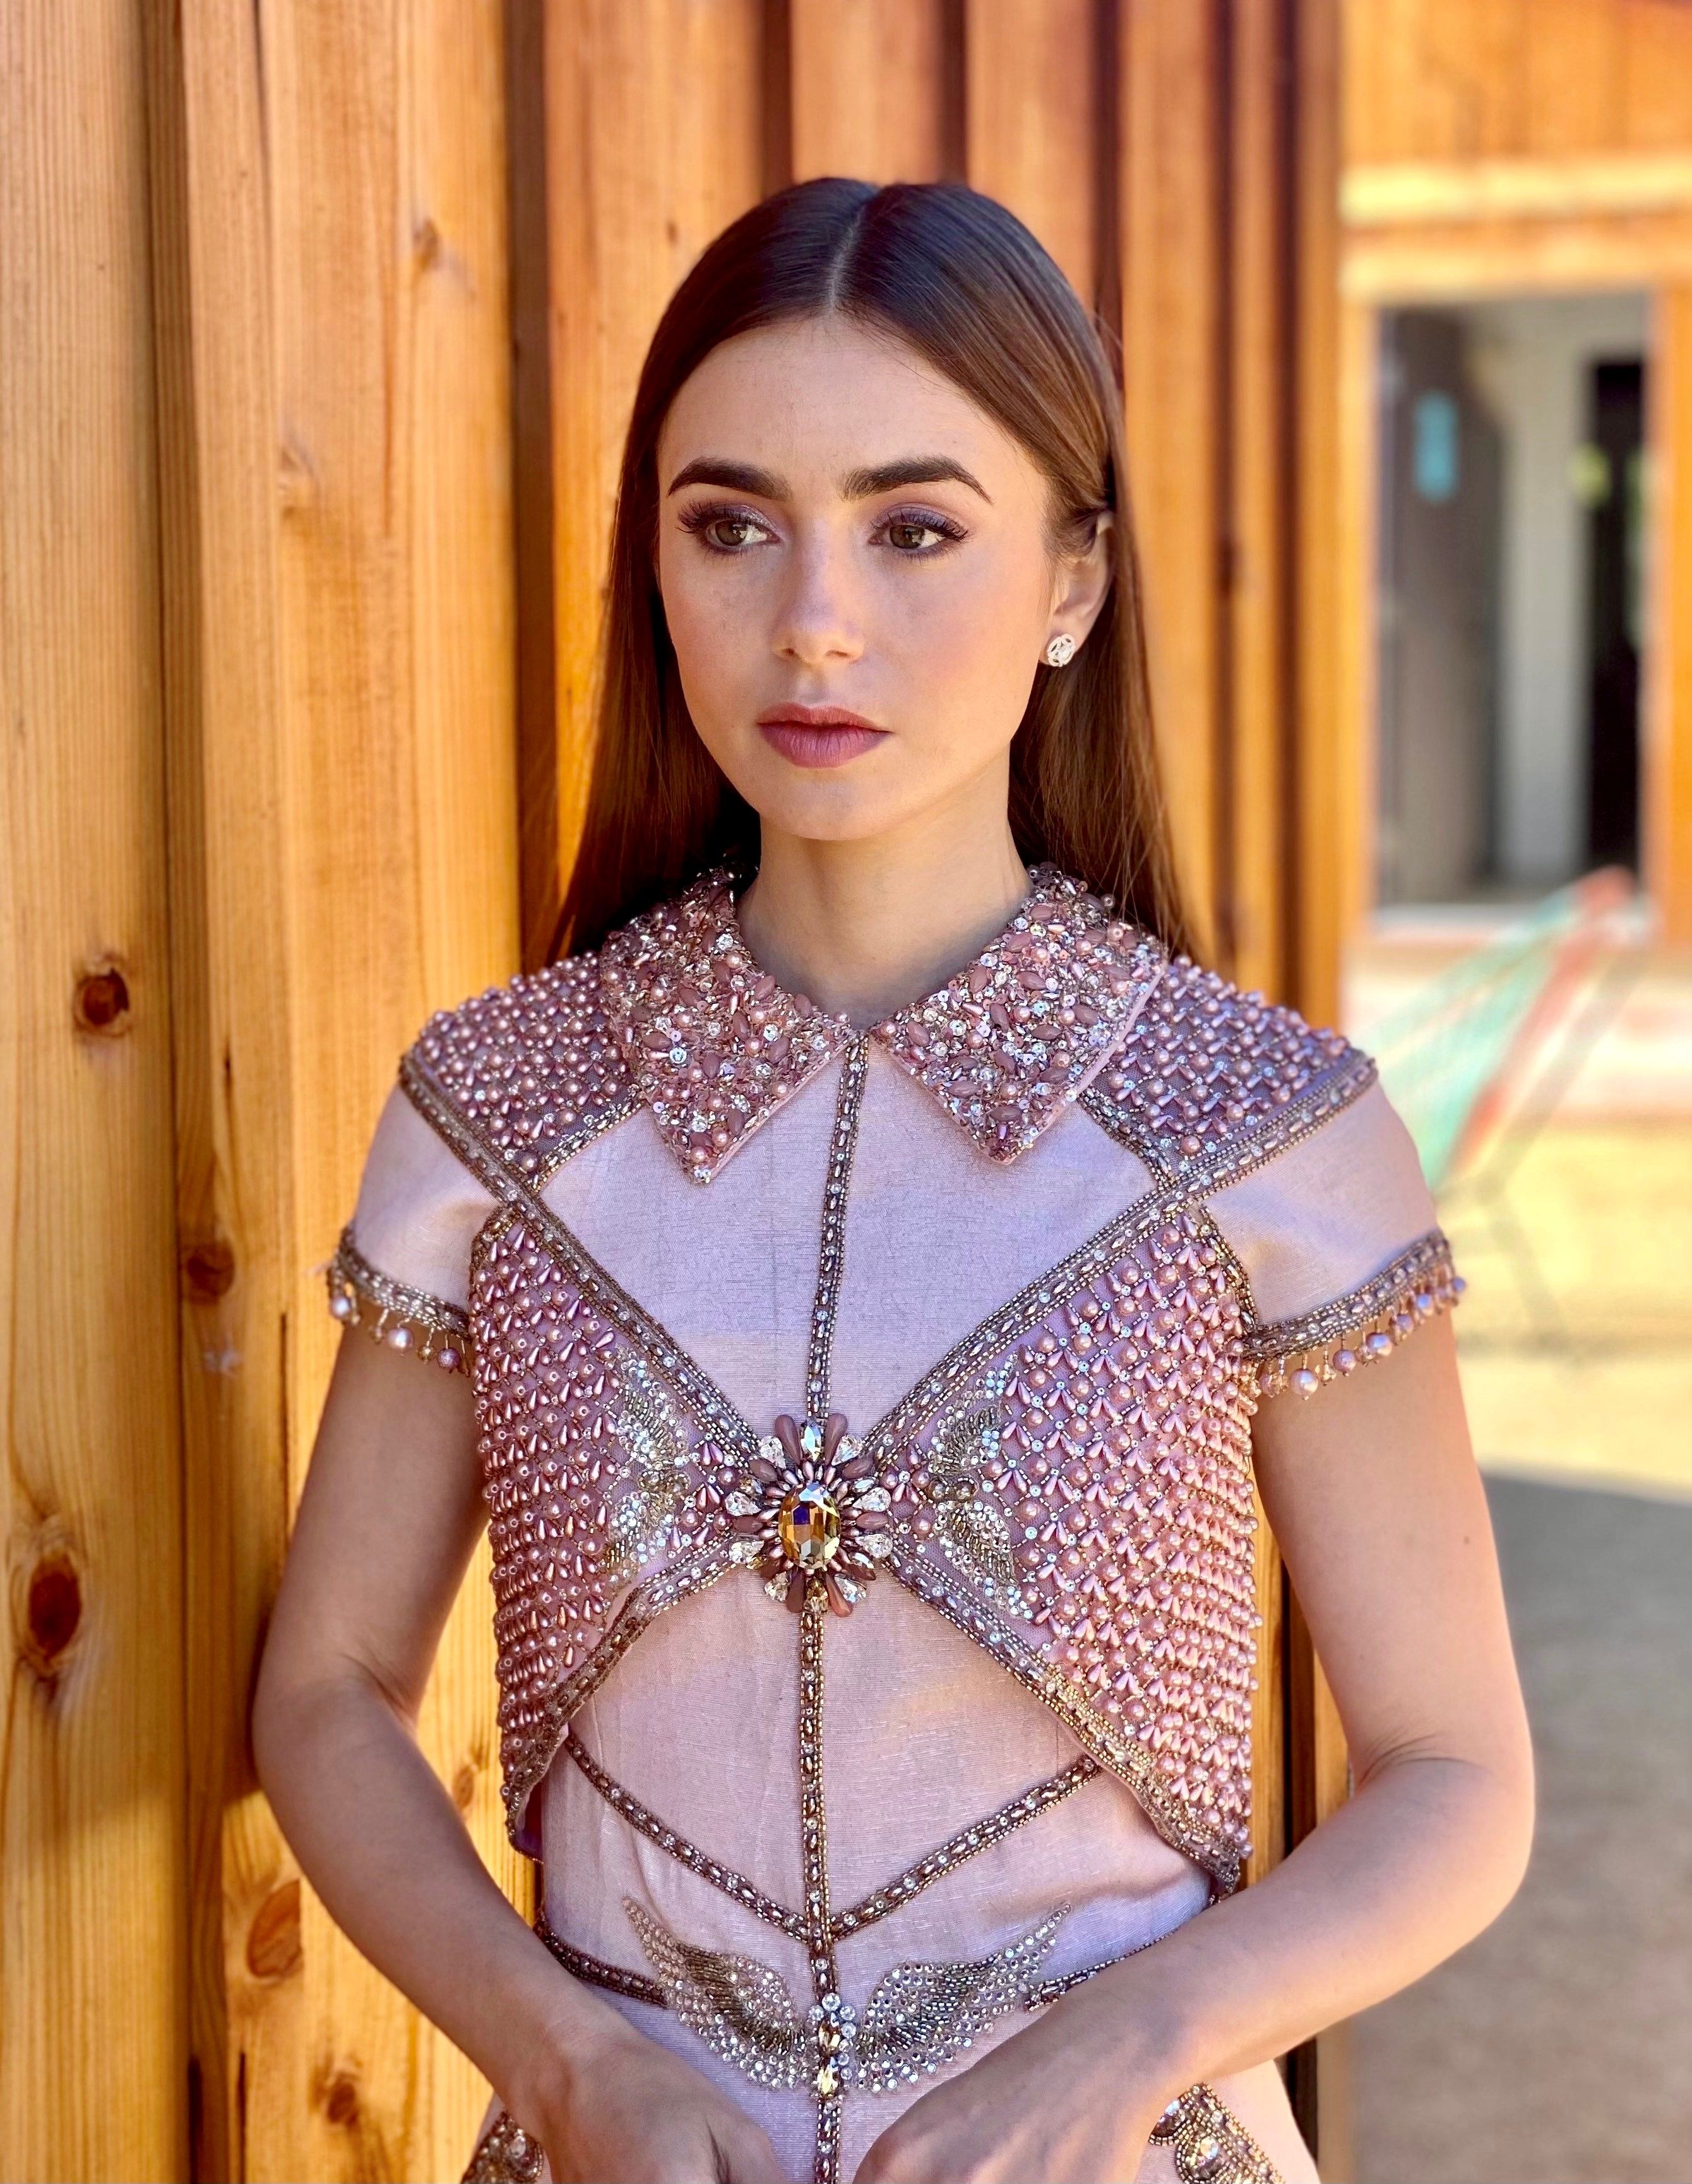 Why Lily Collins Skipped the 2021 Emmys